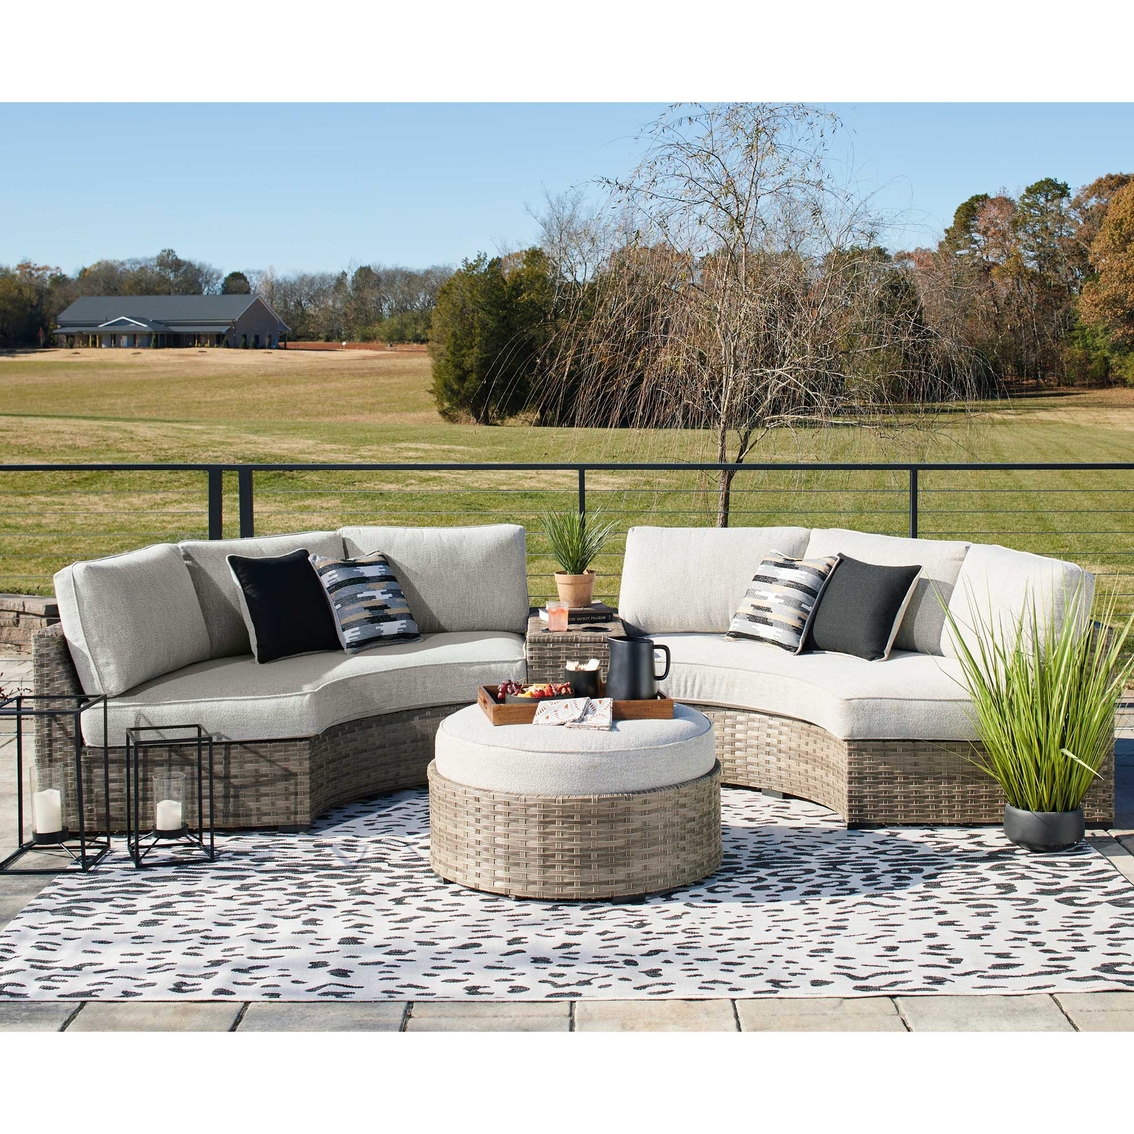 Signature Design by Ashley Calworth 4 pc. Outdoor Set - Image 2 of 5